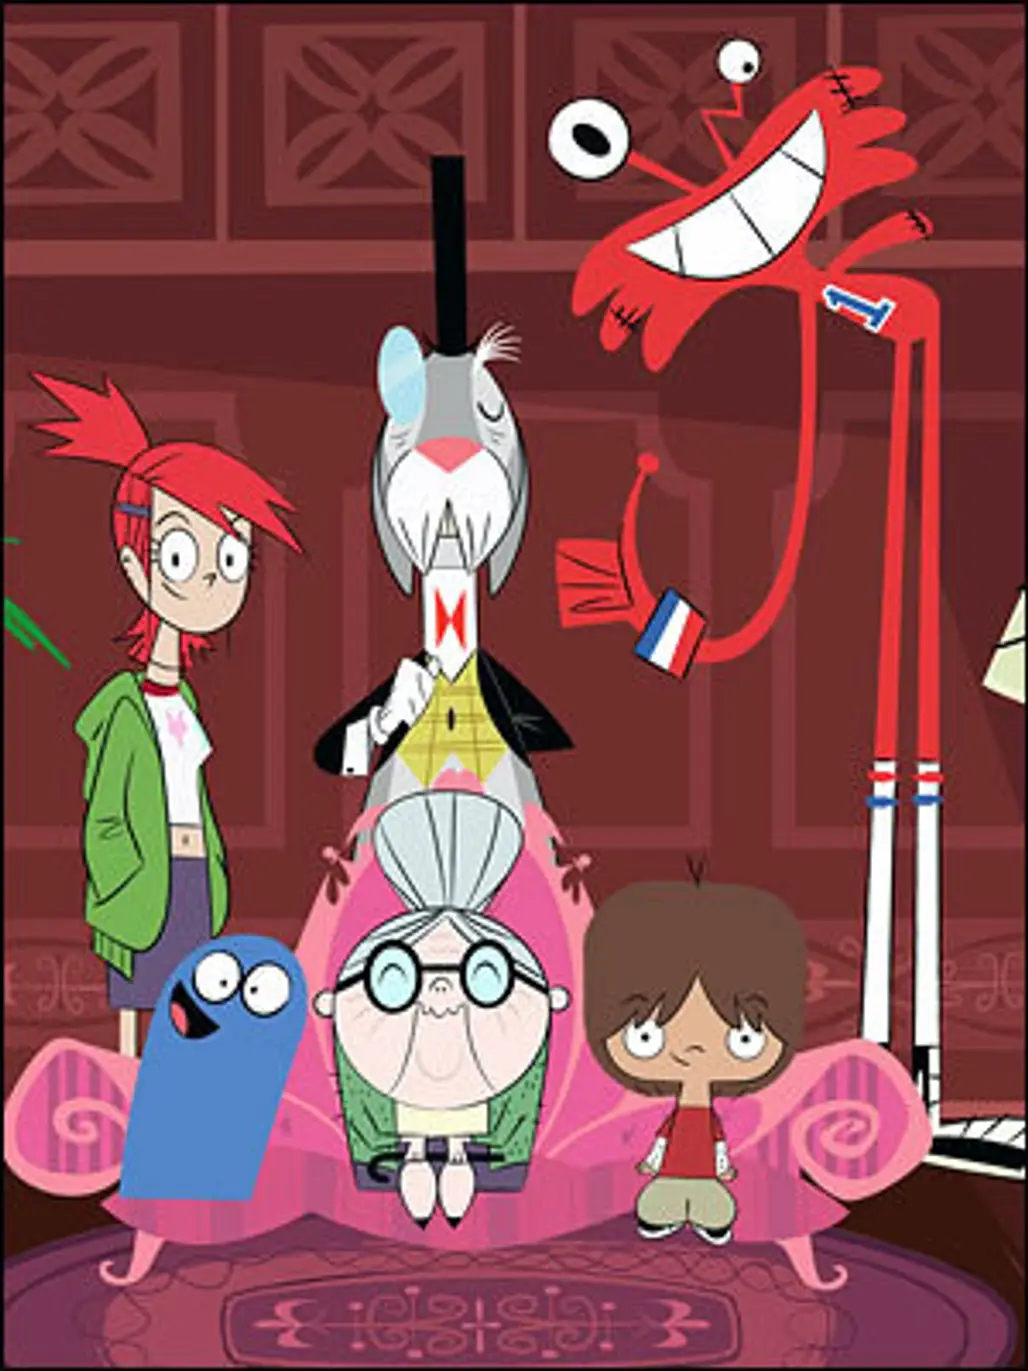 The Fosters from “Foster’s Home for Imaginary Friends”